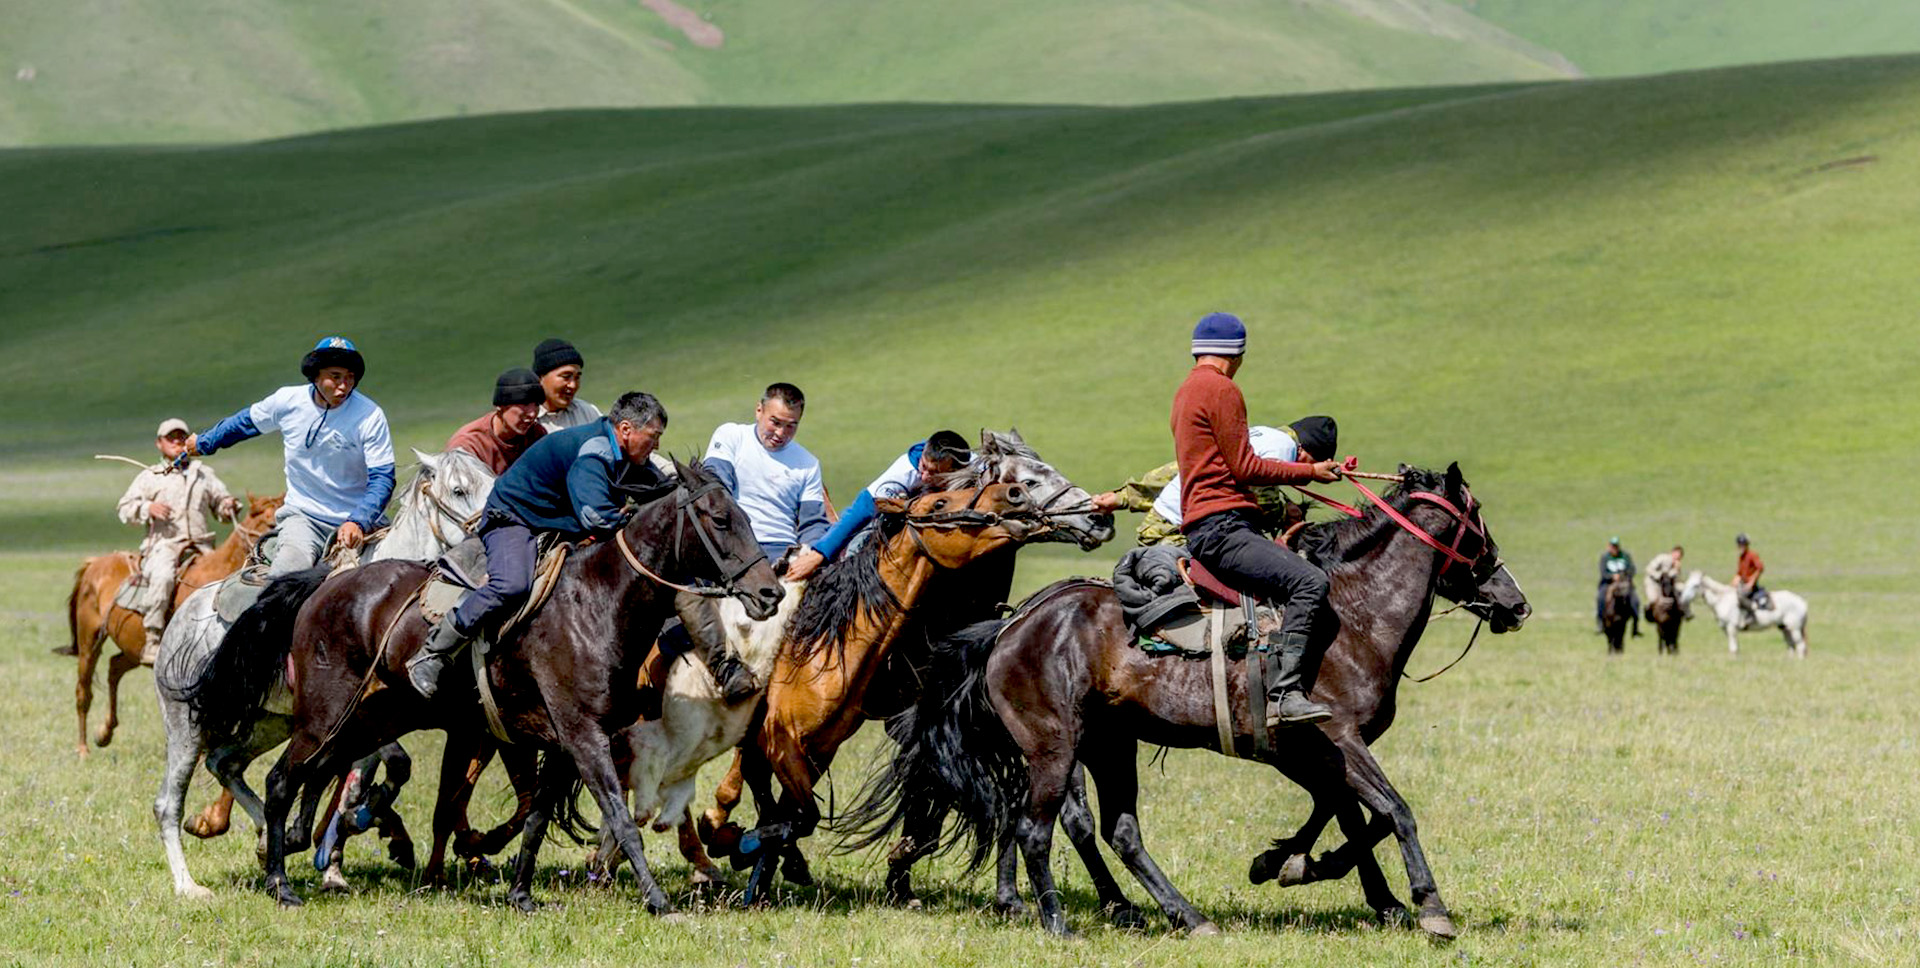 Do you know the sights of Kazakhstan?